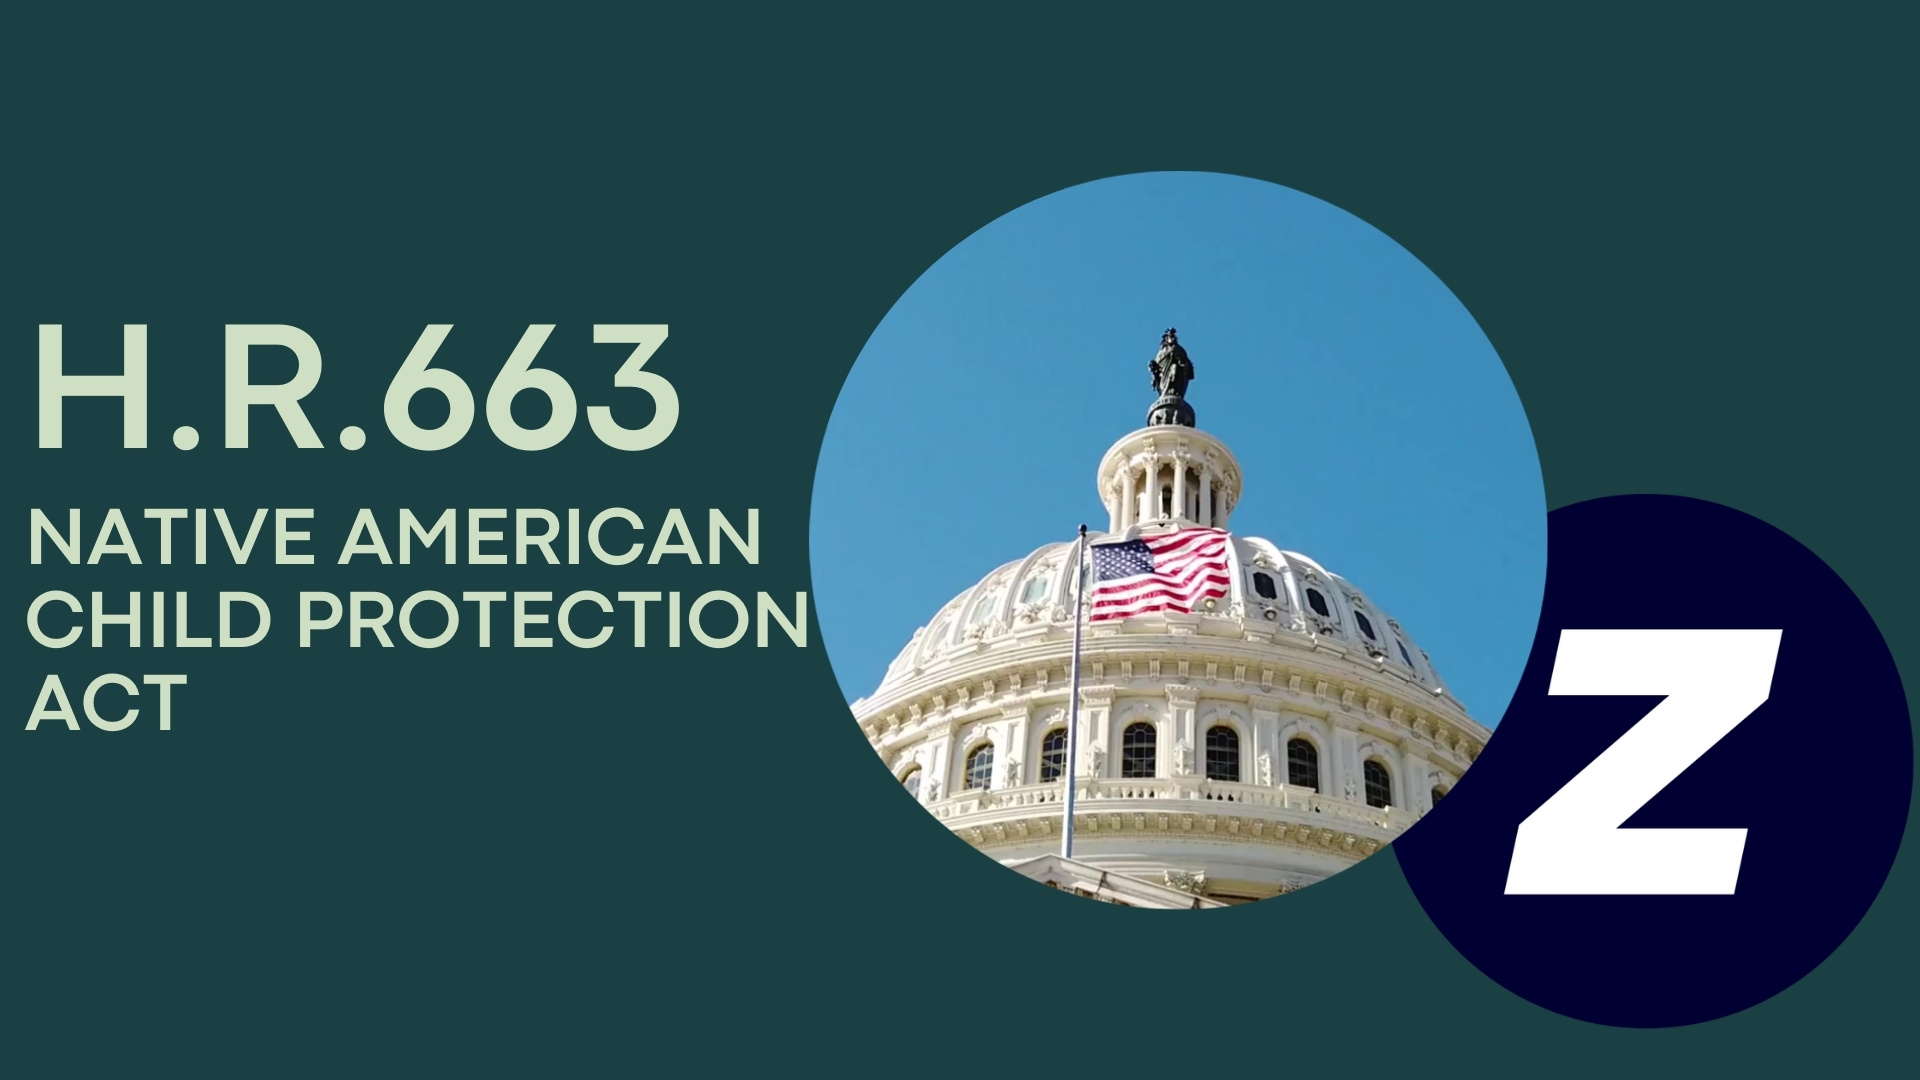 H.R.663 - Native American Child Protection Act